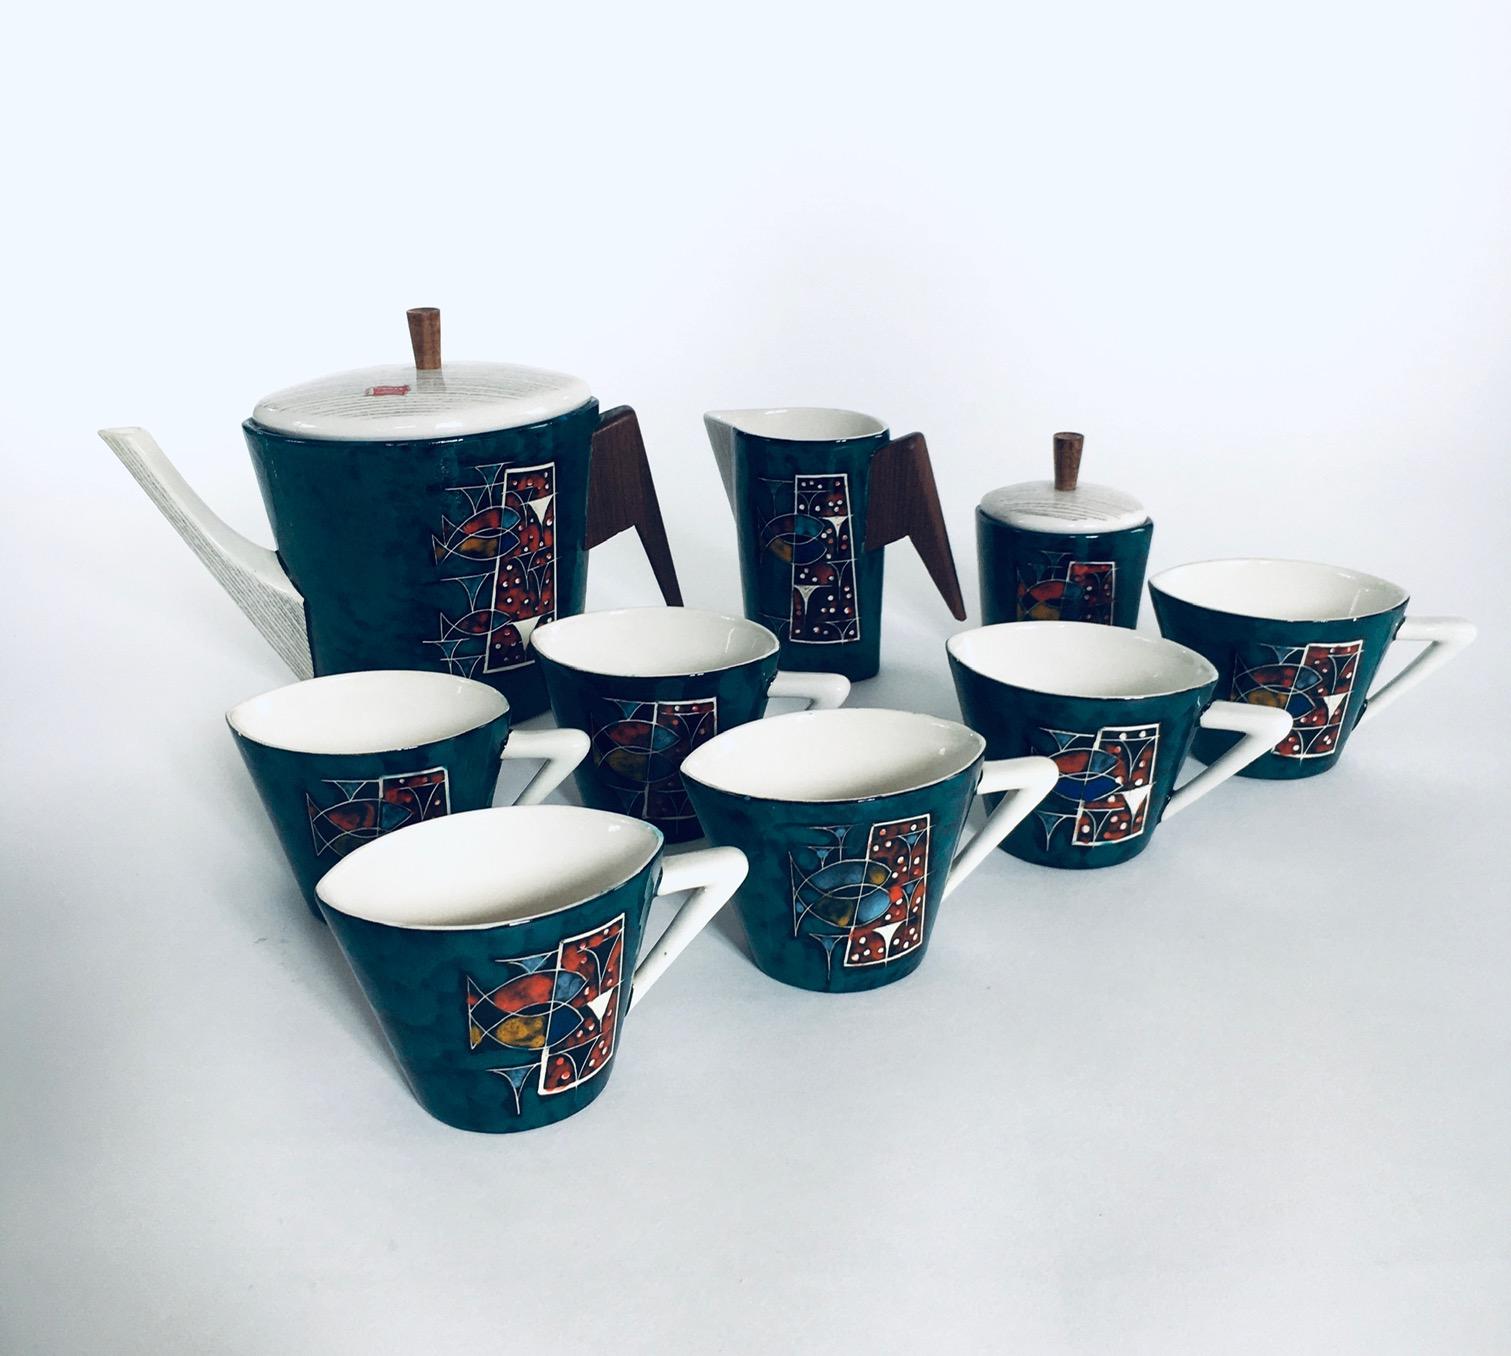 Vintage Midcentury Art Ceramic Coffee or Tea Service set by CEMAS, Italy 1950's. Marked with original sticker; C.E.M.A.S. Sesto Foirentino and on the bottom: 8137 CEMAS. This set consists of a Tea or Coffee pot, Sugar bowl, Milk jug and 6 cups. All